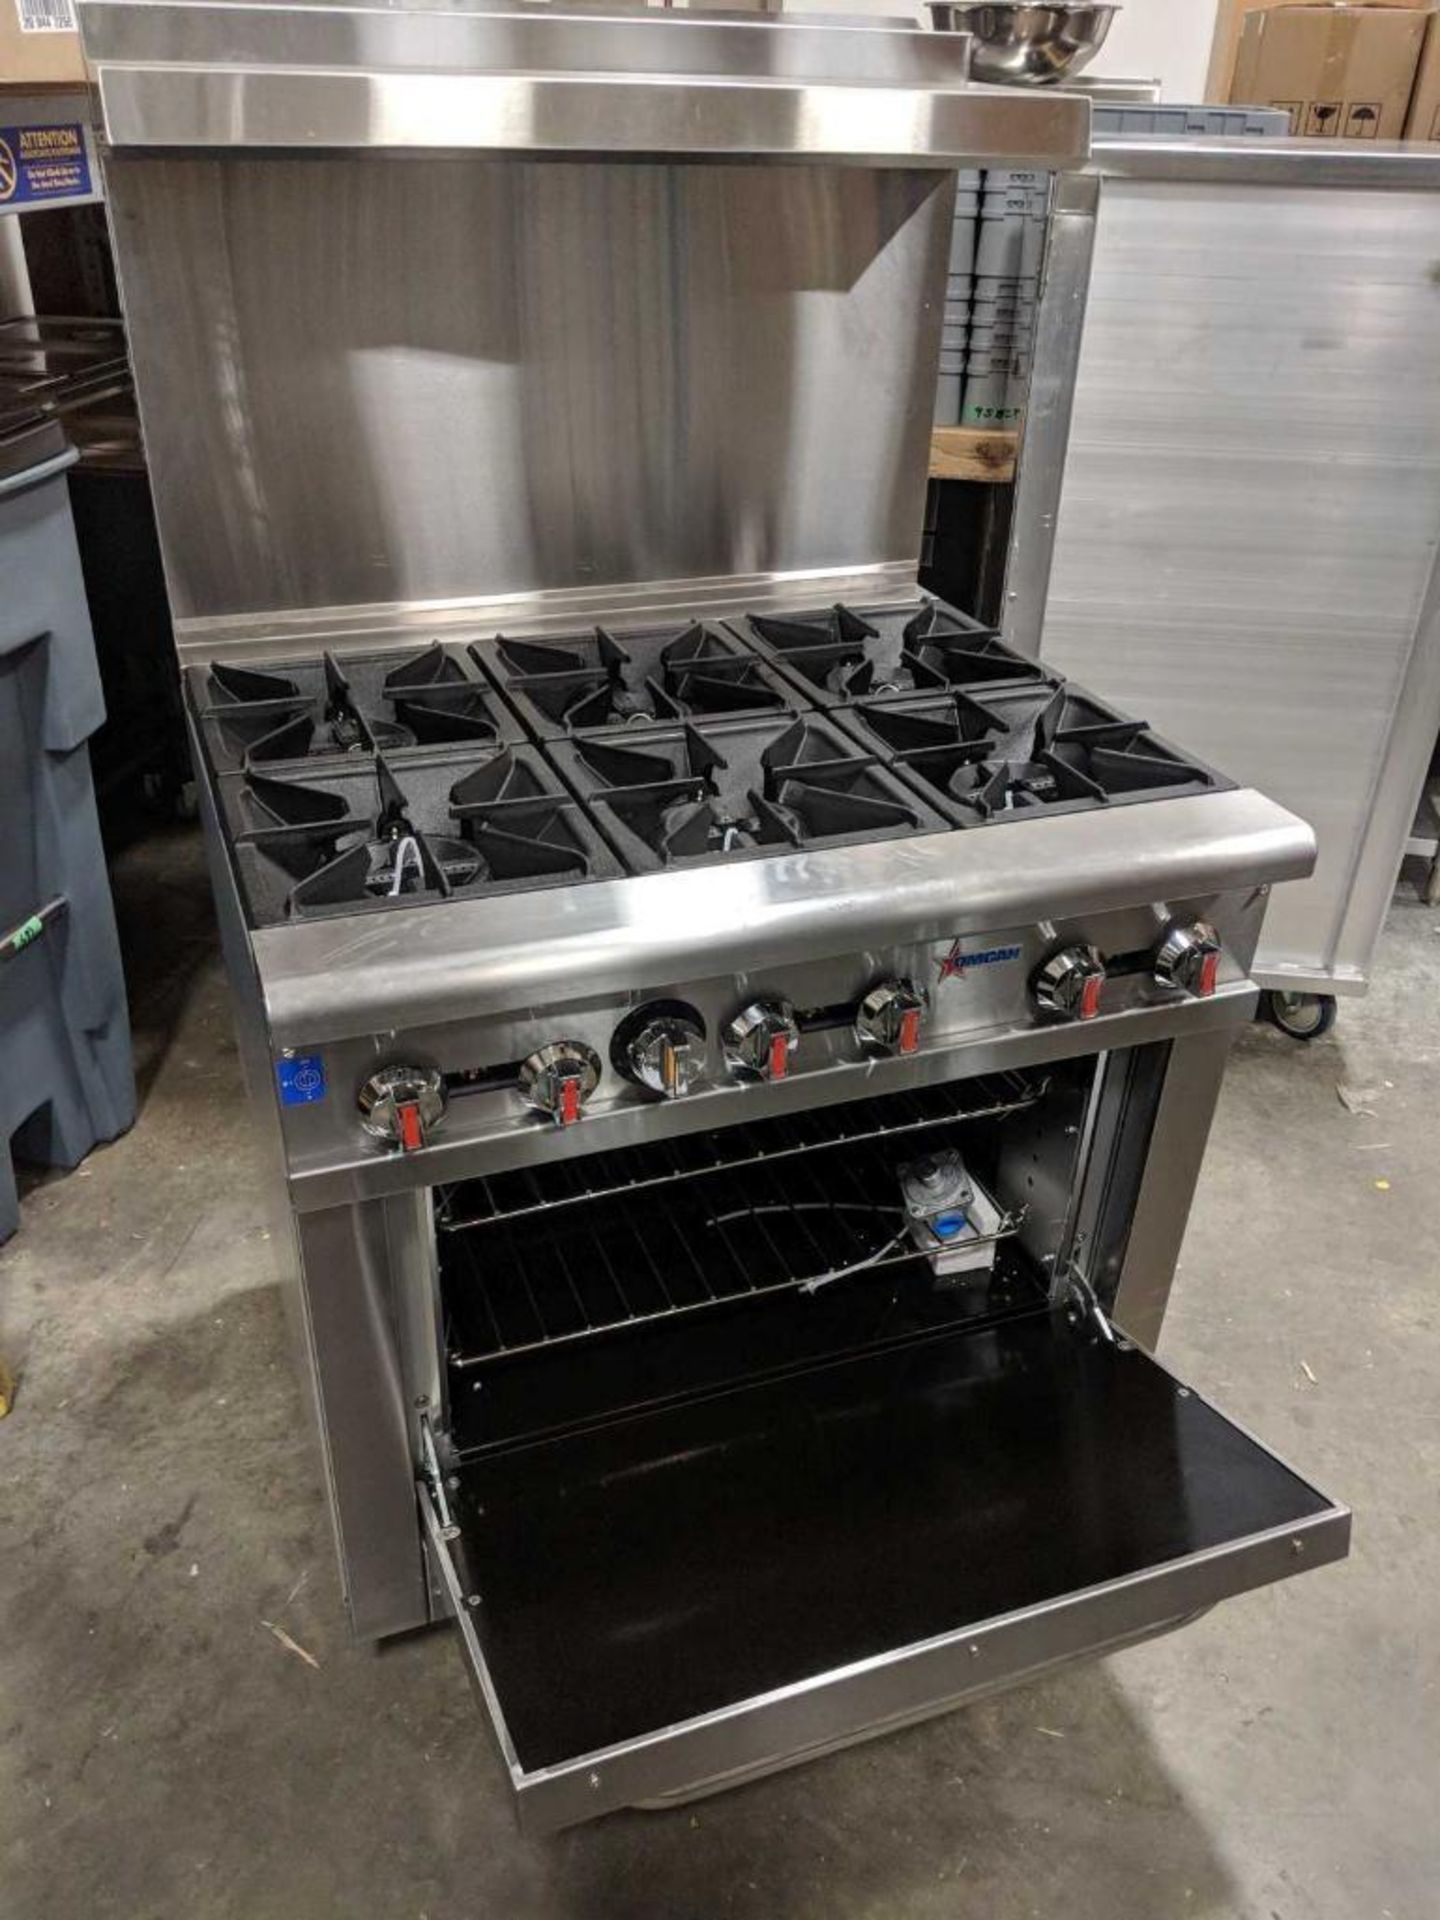 36" COMMERCIAL GAS RANGE, NATURAL GAS - OMCAN 43151 - Image 4 of 10